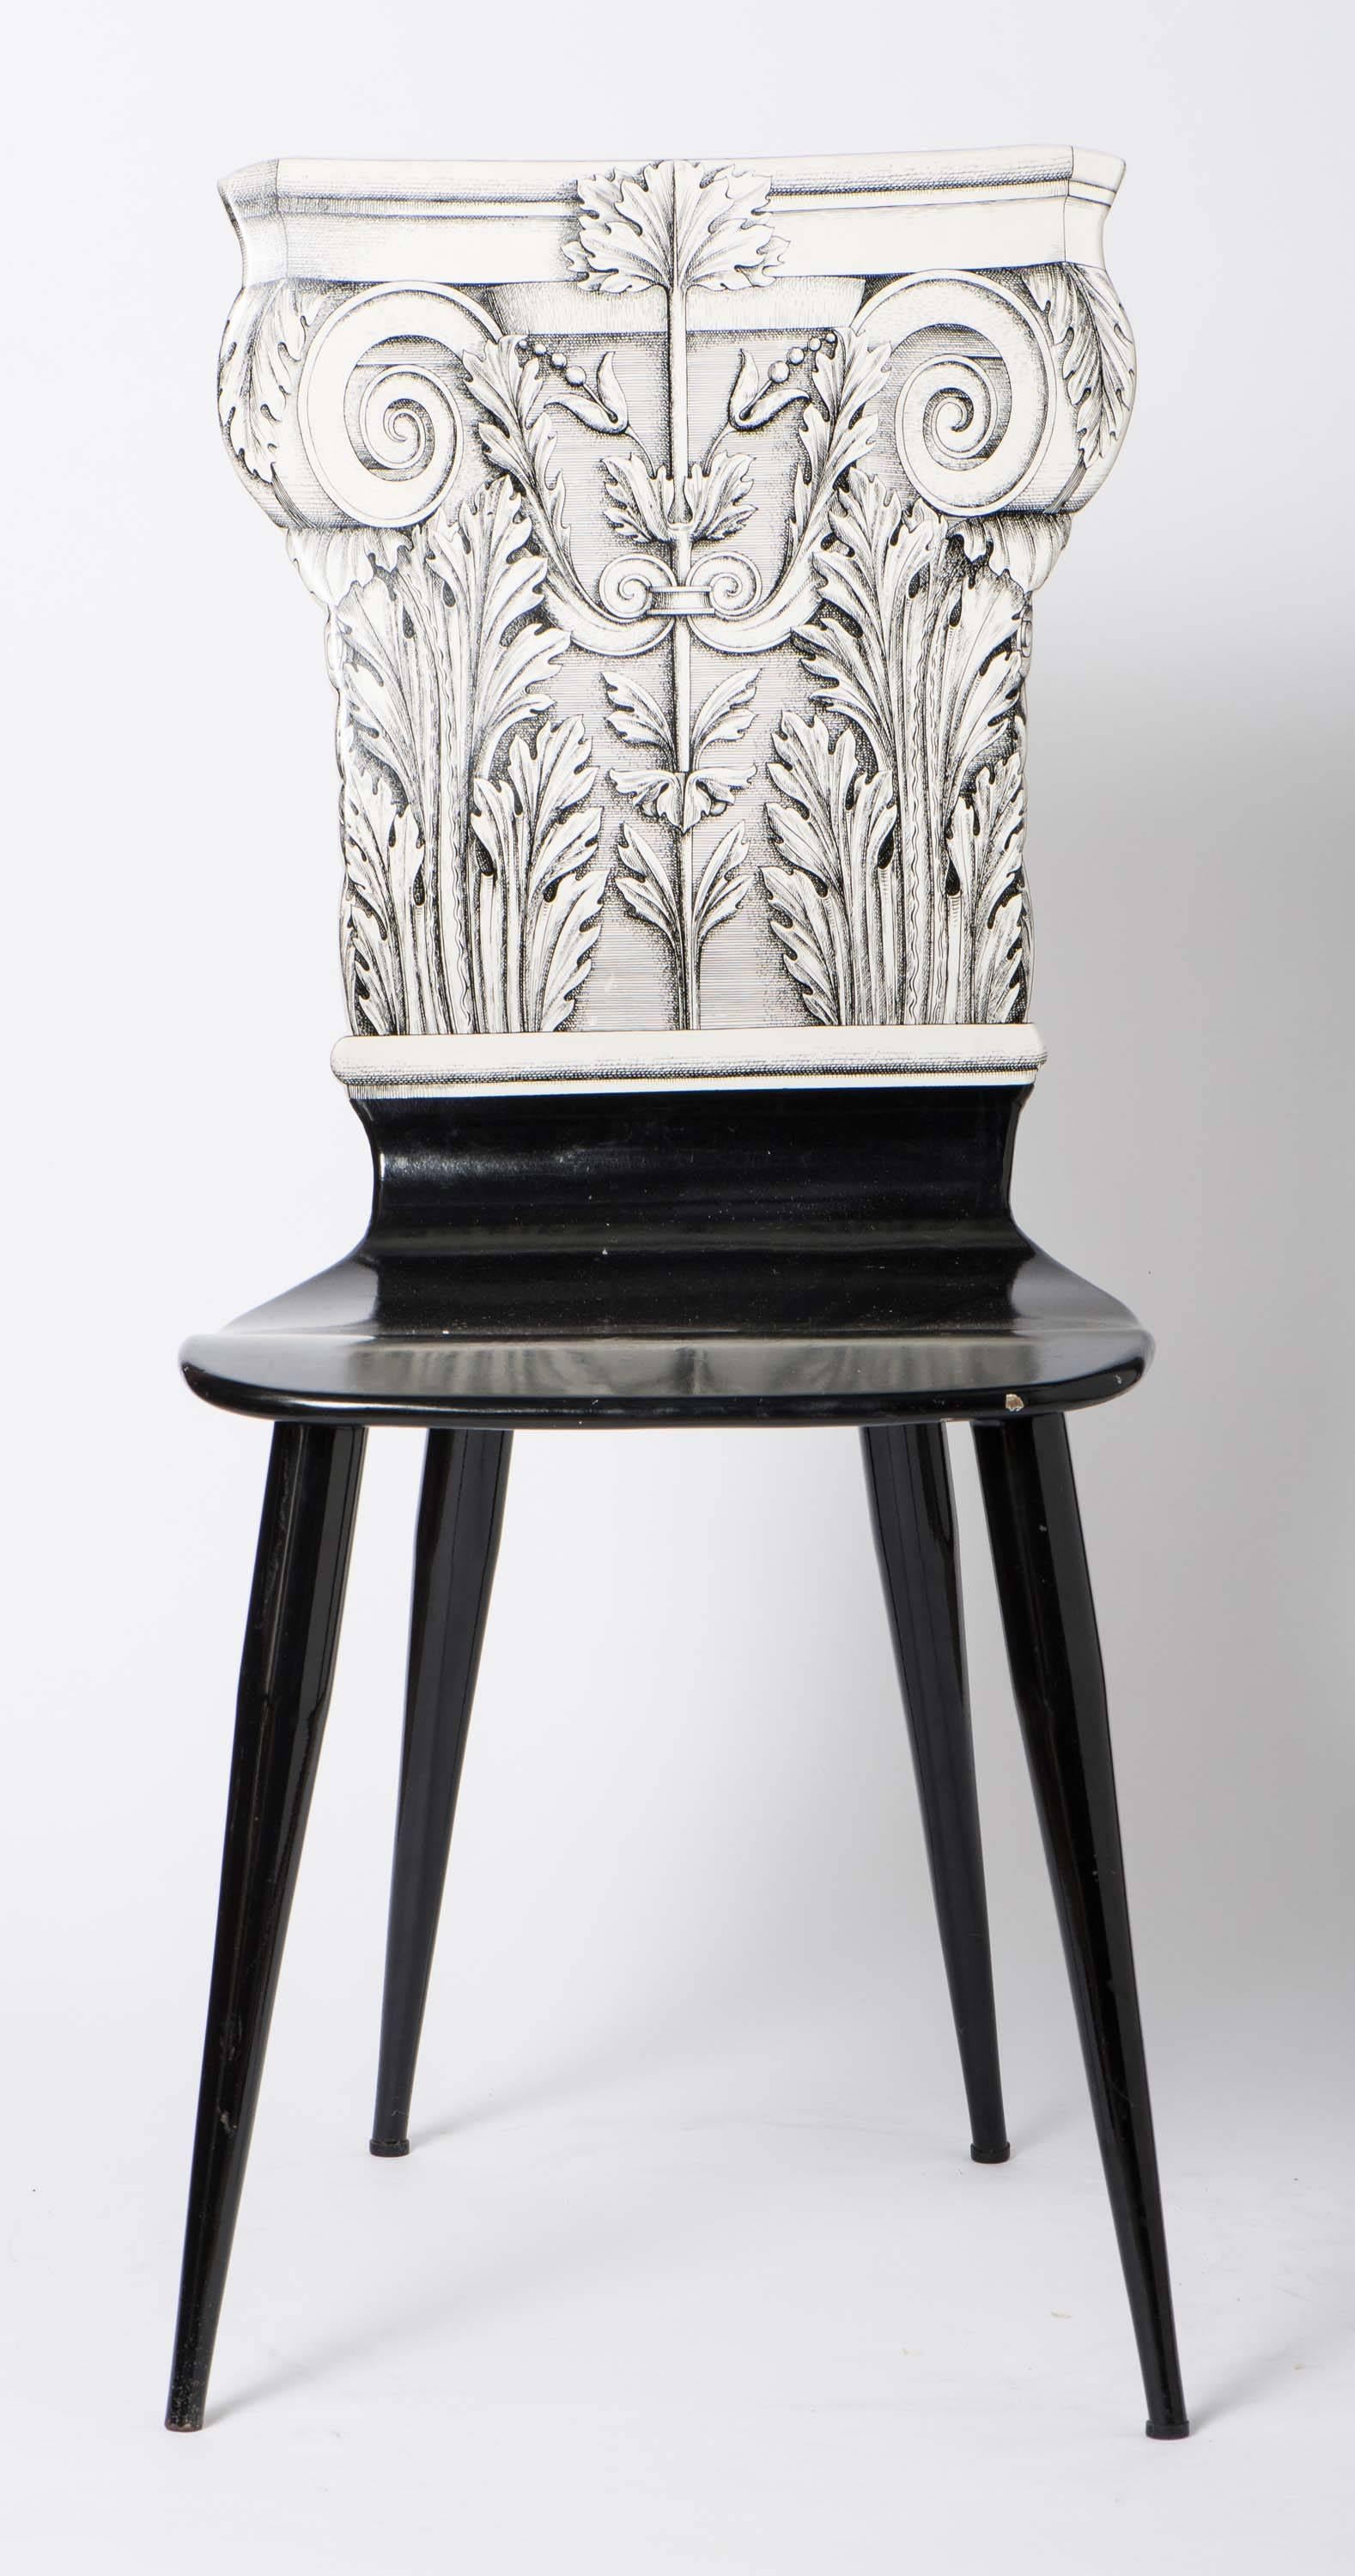 An early chair by Piero Fornasetti.
“Capitello Corinizio”
Lithographically printed.
Wood, lacquer and metal legs and base.
Italy, circa 1960.
Measures: 94 cm high x 41 cm wide x 45 cm deep.
 